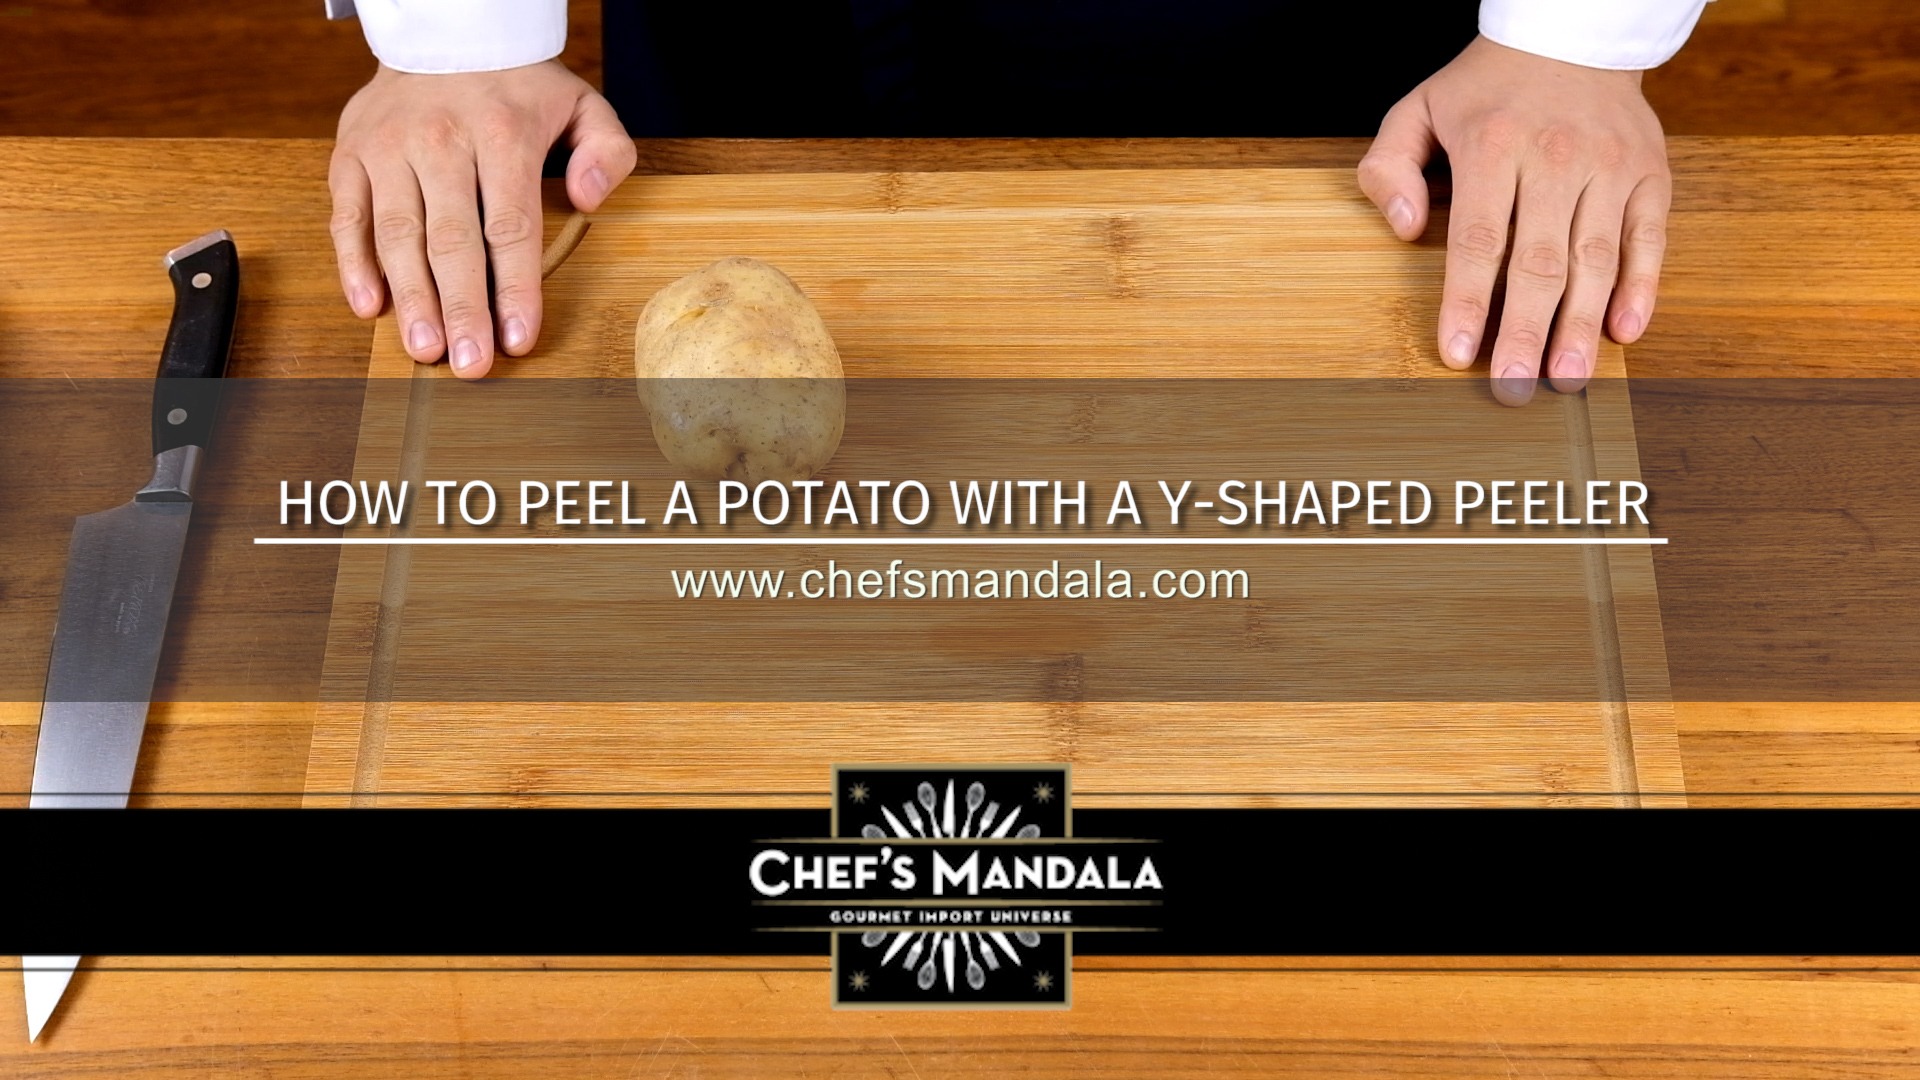 HOW TO PEEL A POTATO WITH A Y-SHAPED PEELER